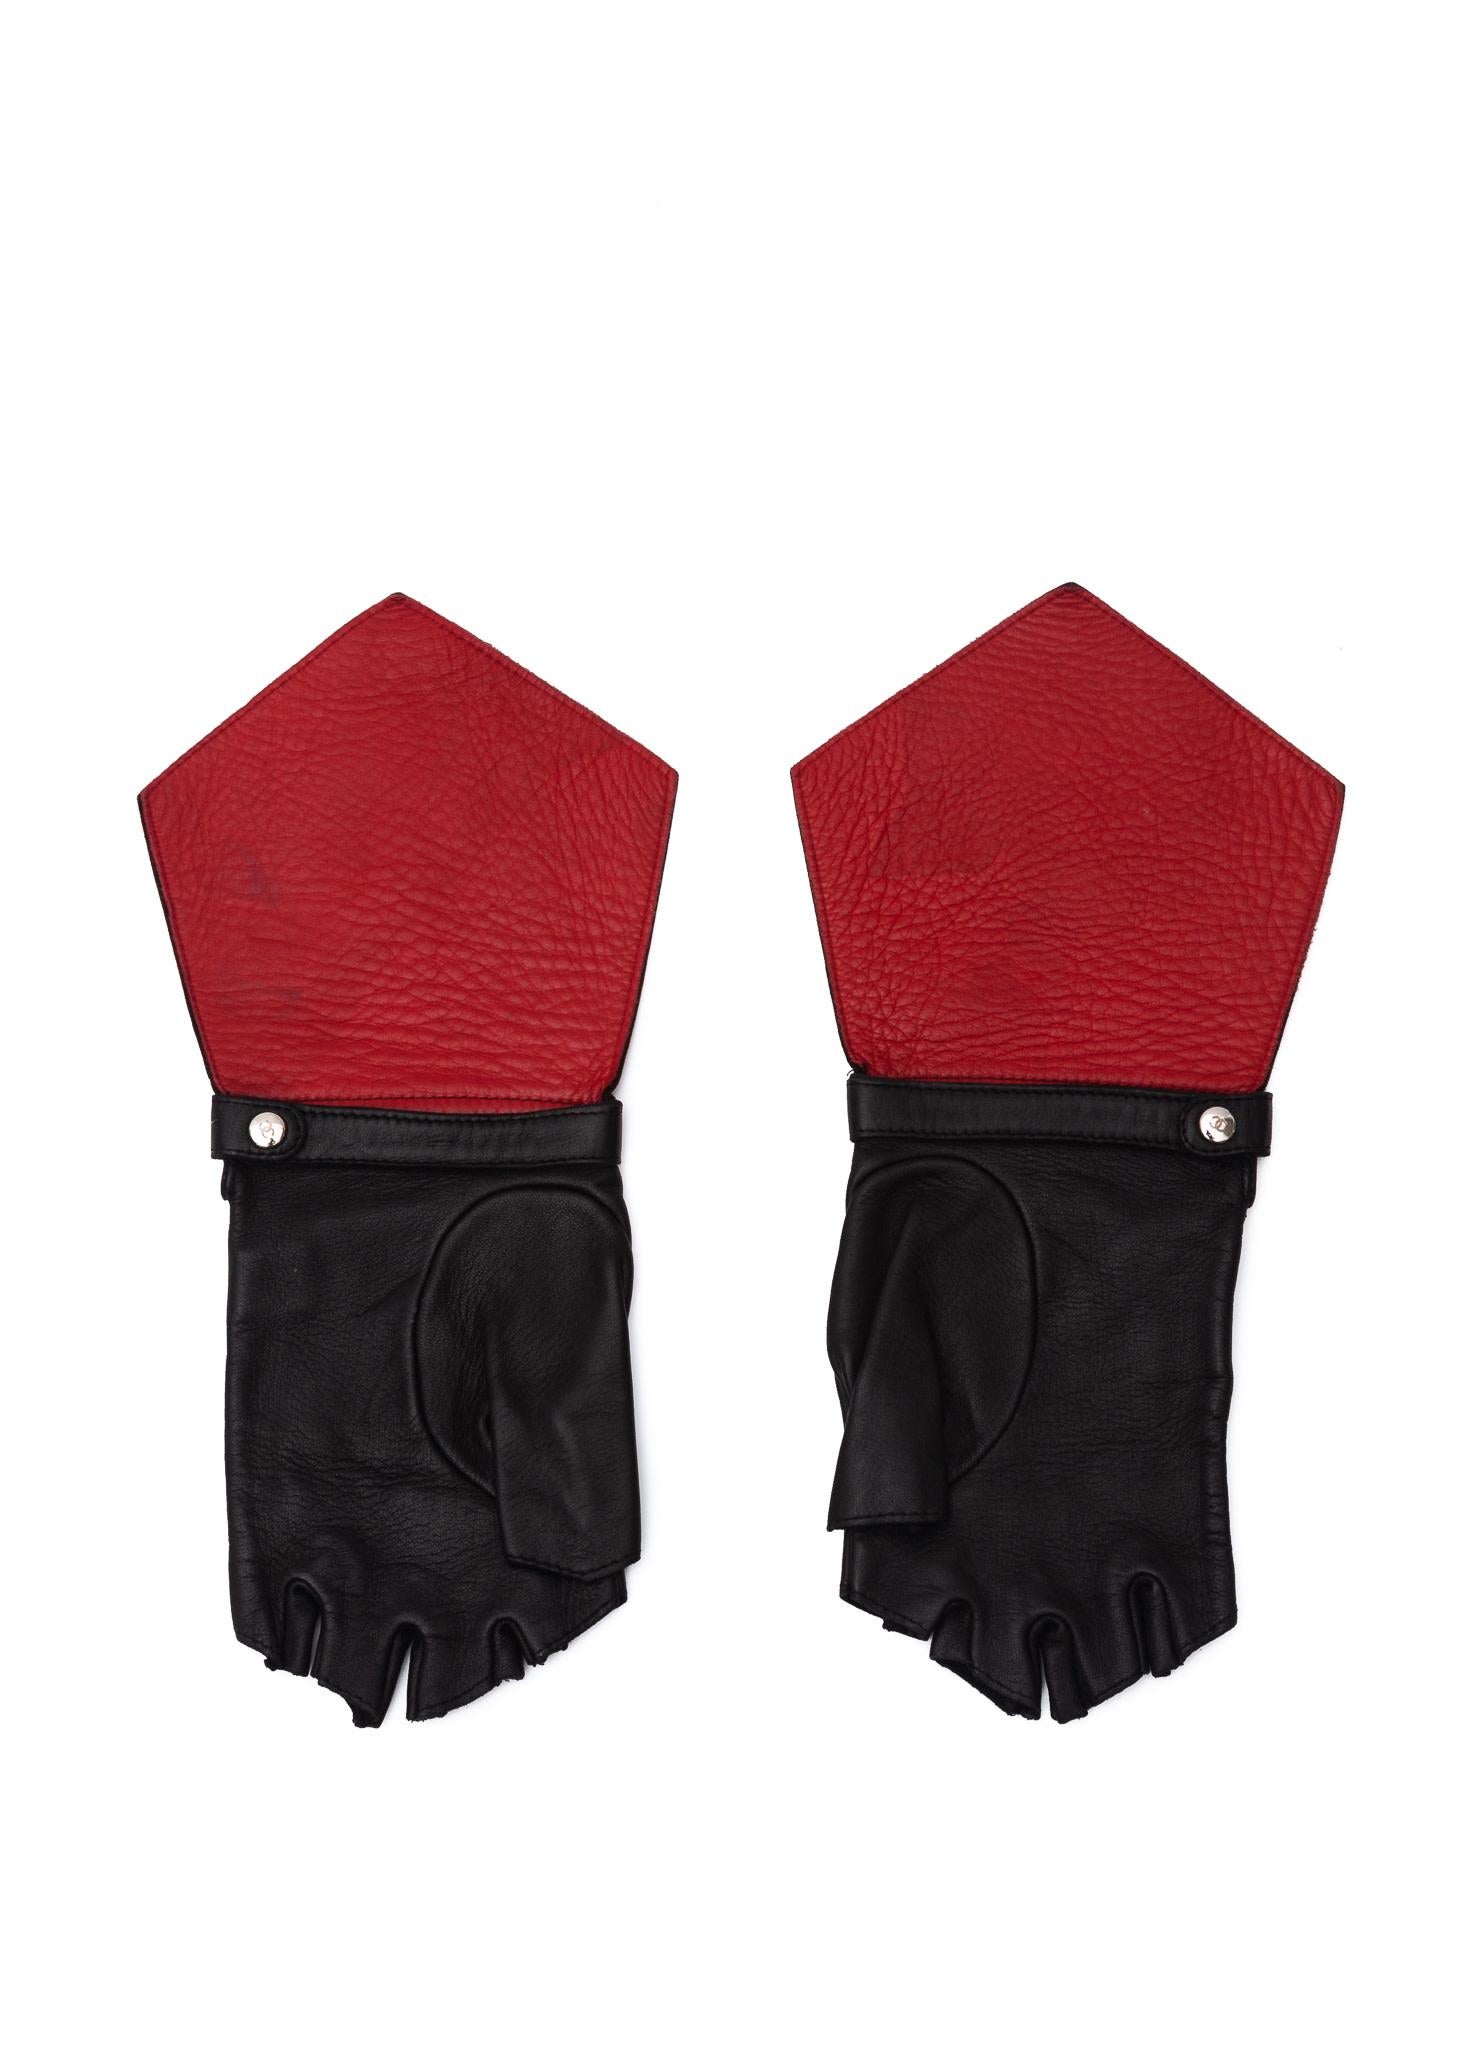 Black Leather fingerless gloves by Chanel. Fits Small. Red leather on the under side. Leather strap with a snap for fastening around wrist.

COLOR: black/red
MATERIAL: Leather
SIZE: Small
COMES WITH: Dust bag
CONDITION: Pristine - preloved item is